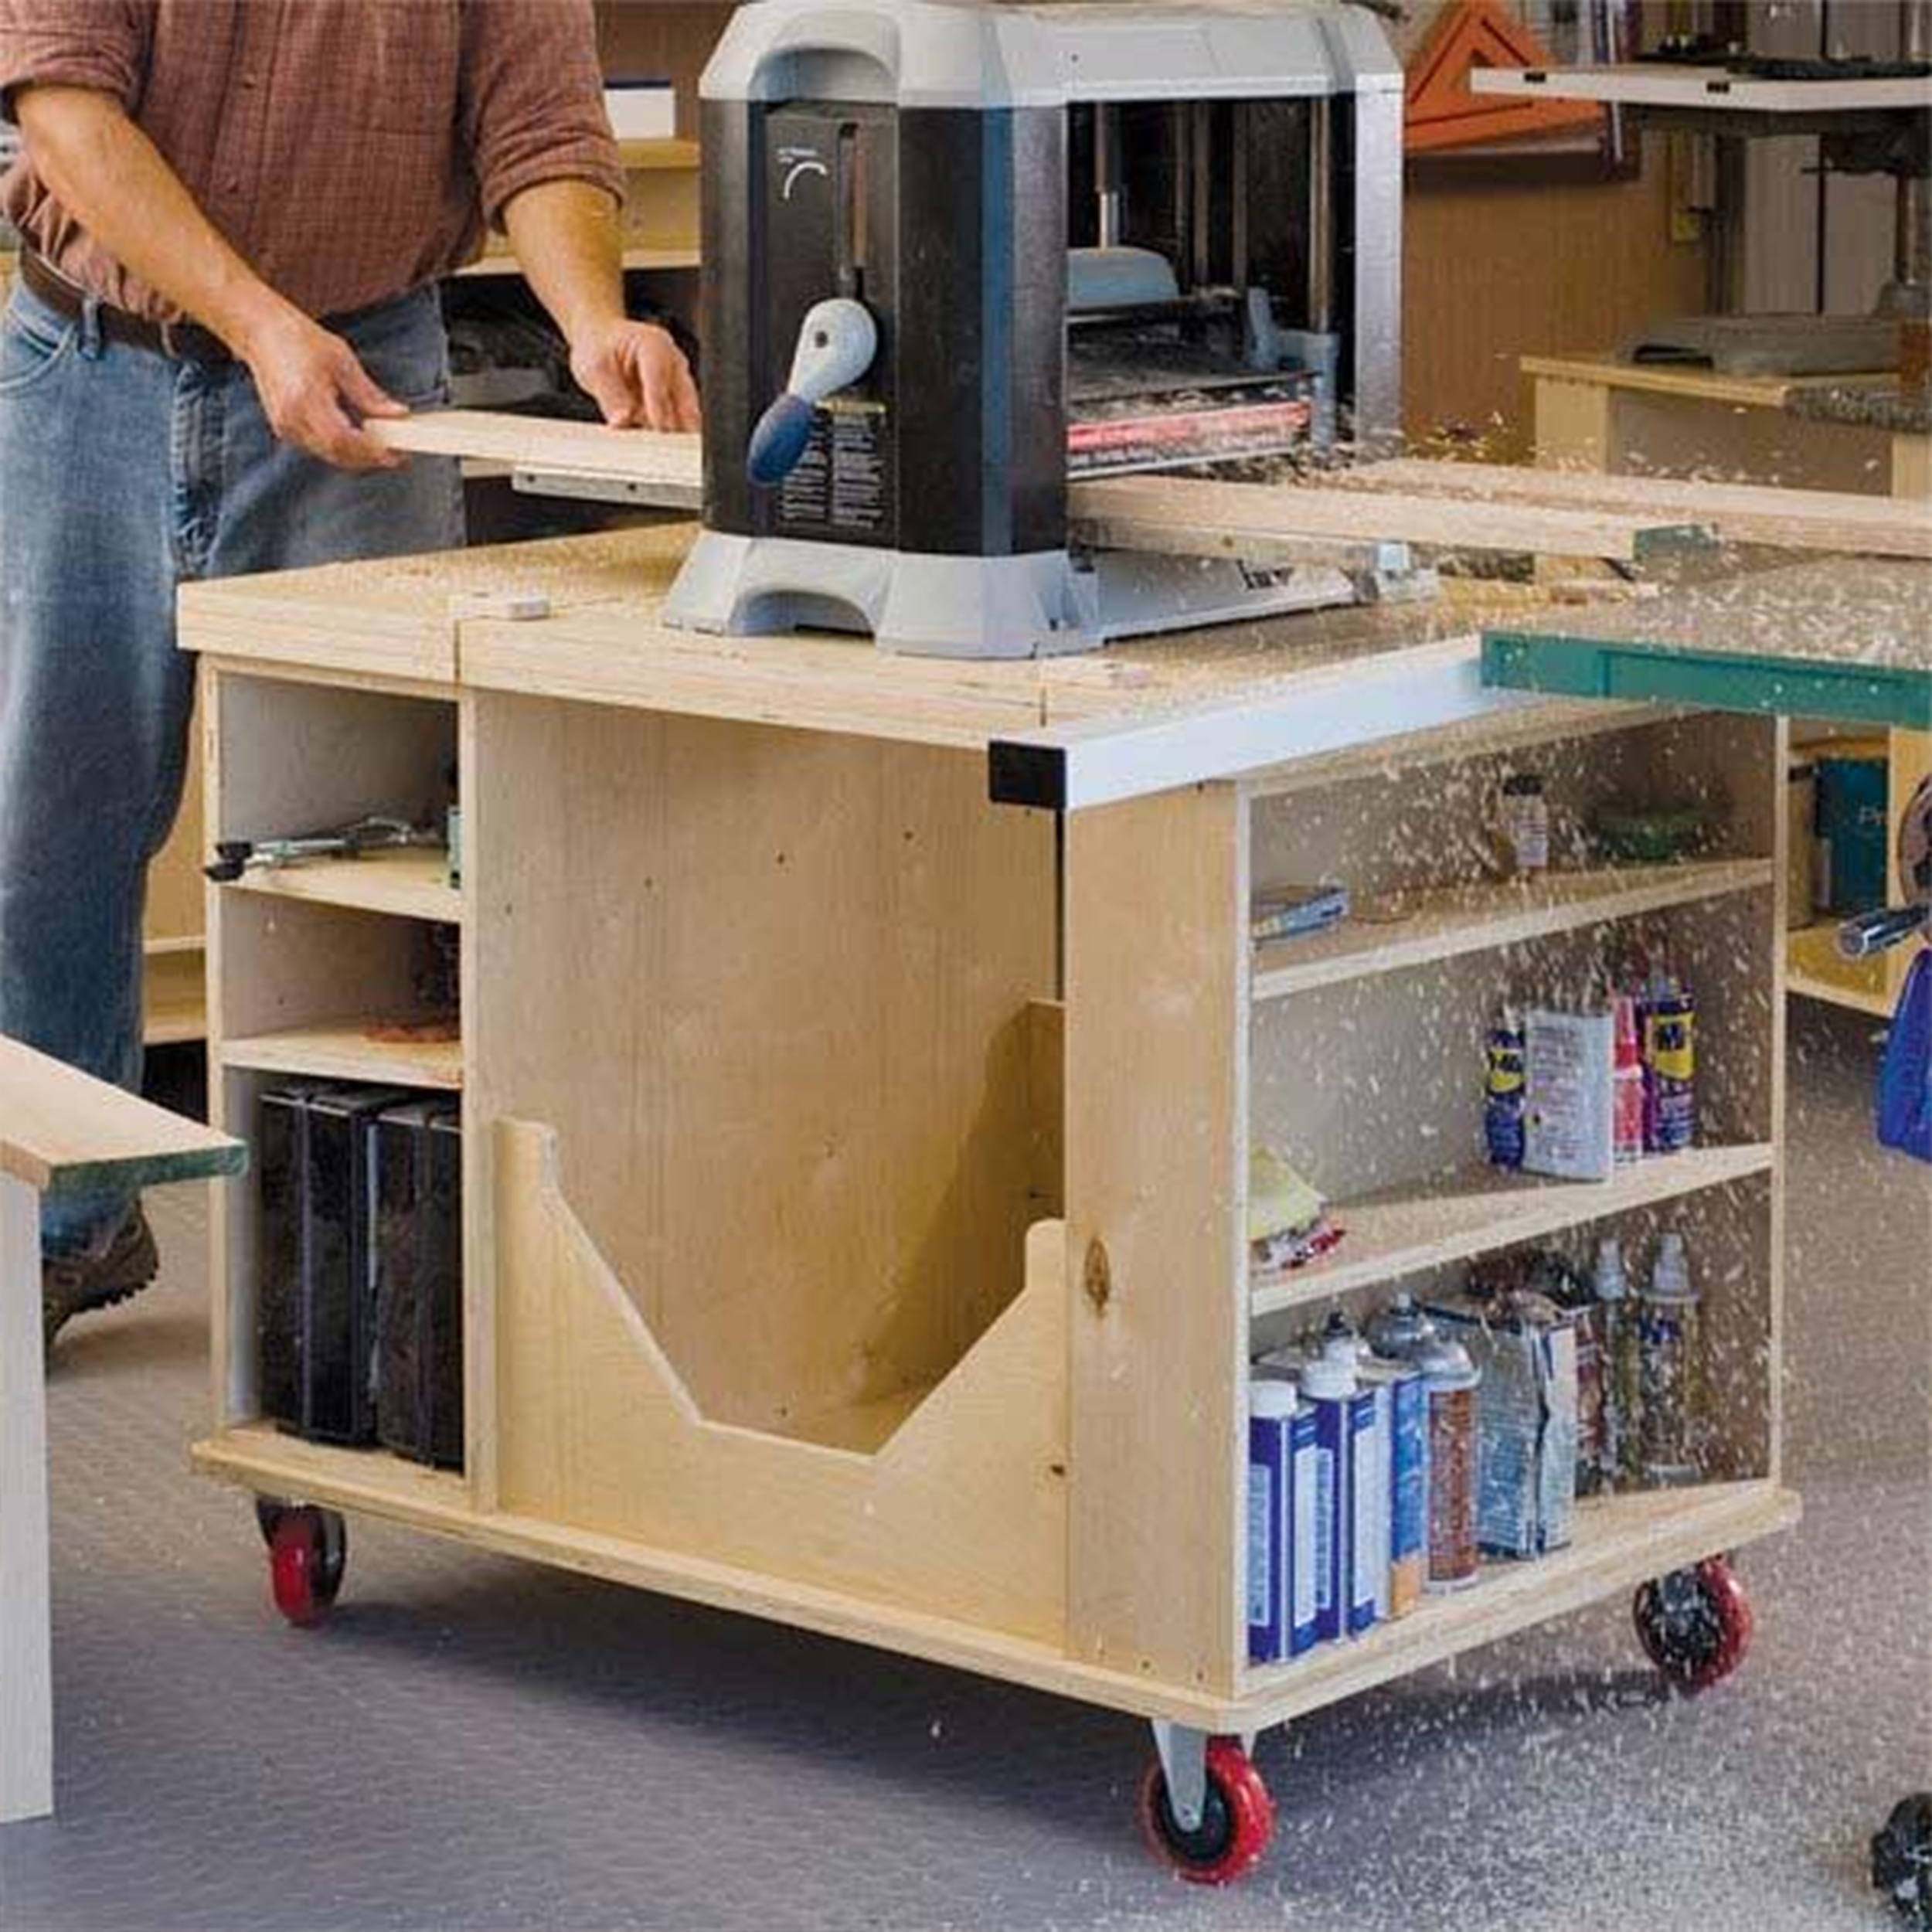 Woodworking Project Paper Plan To Build Flip-top Cart